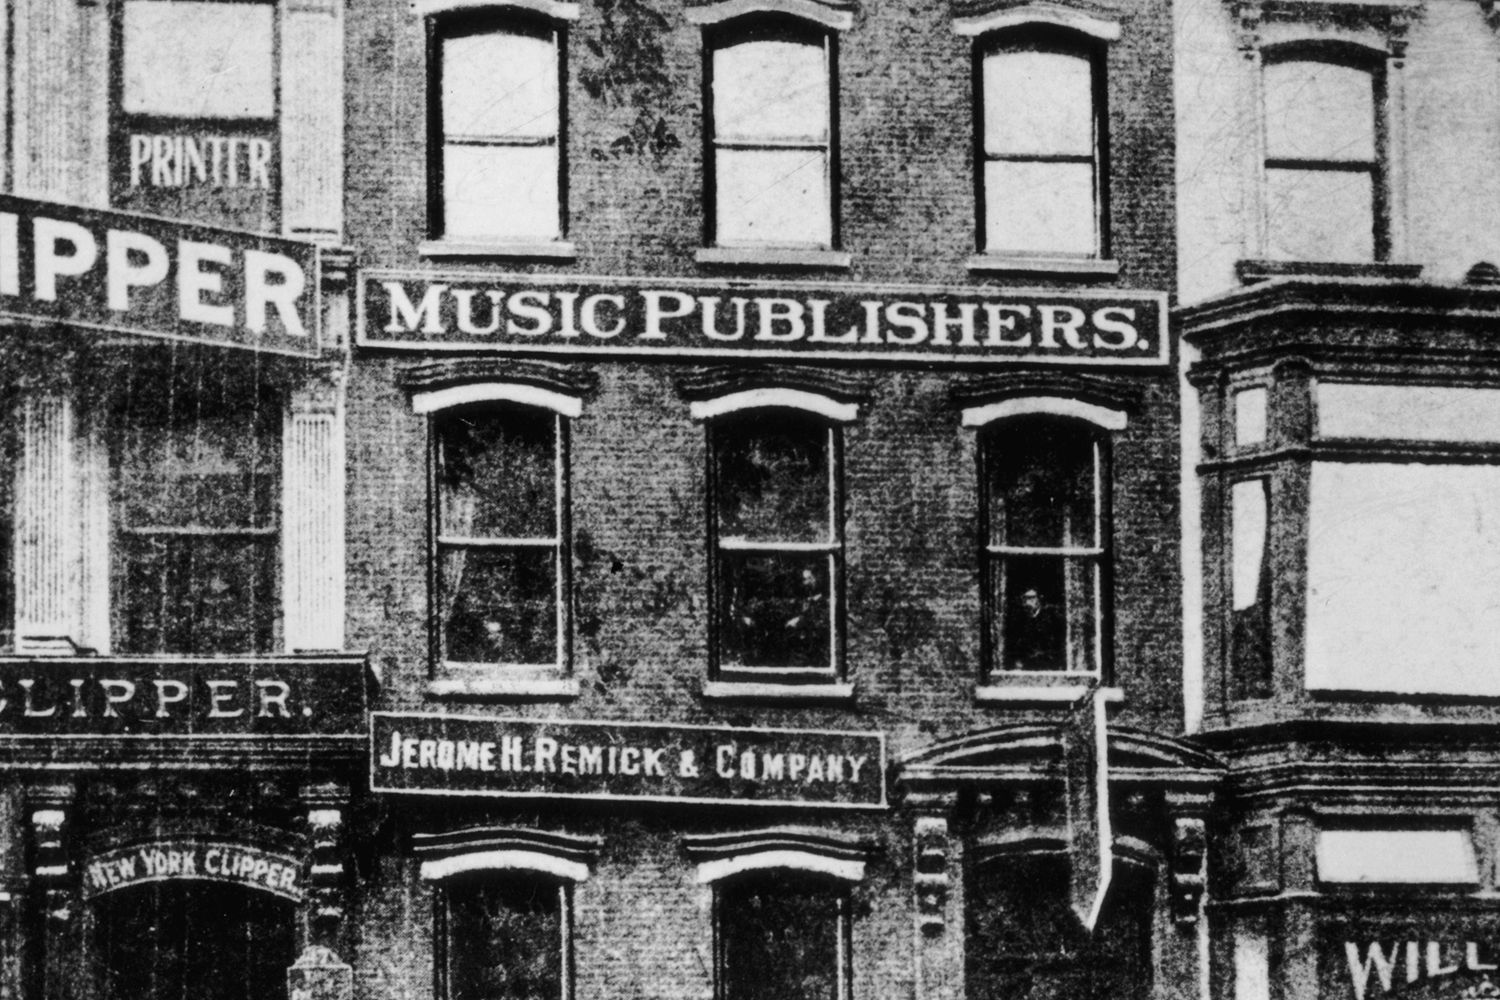 Nomad's Tin Pan Alley, birthplace of American pop music, gains five  landmarks